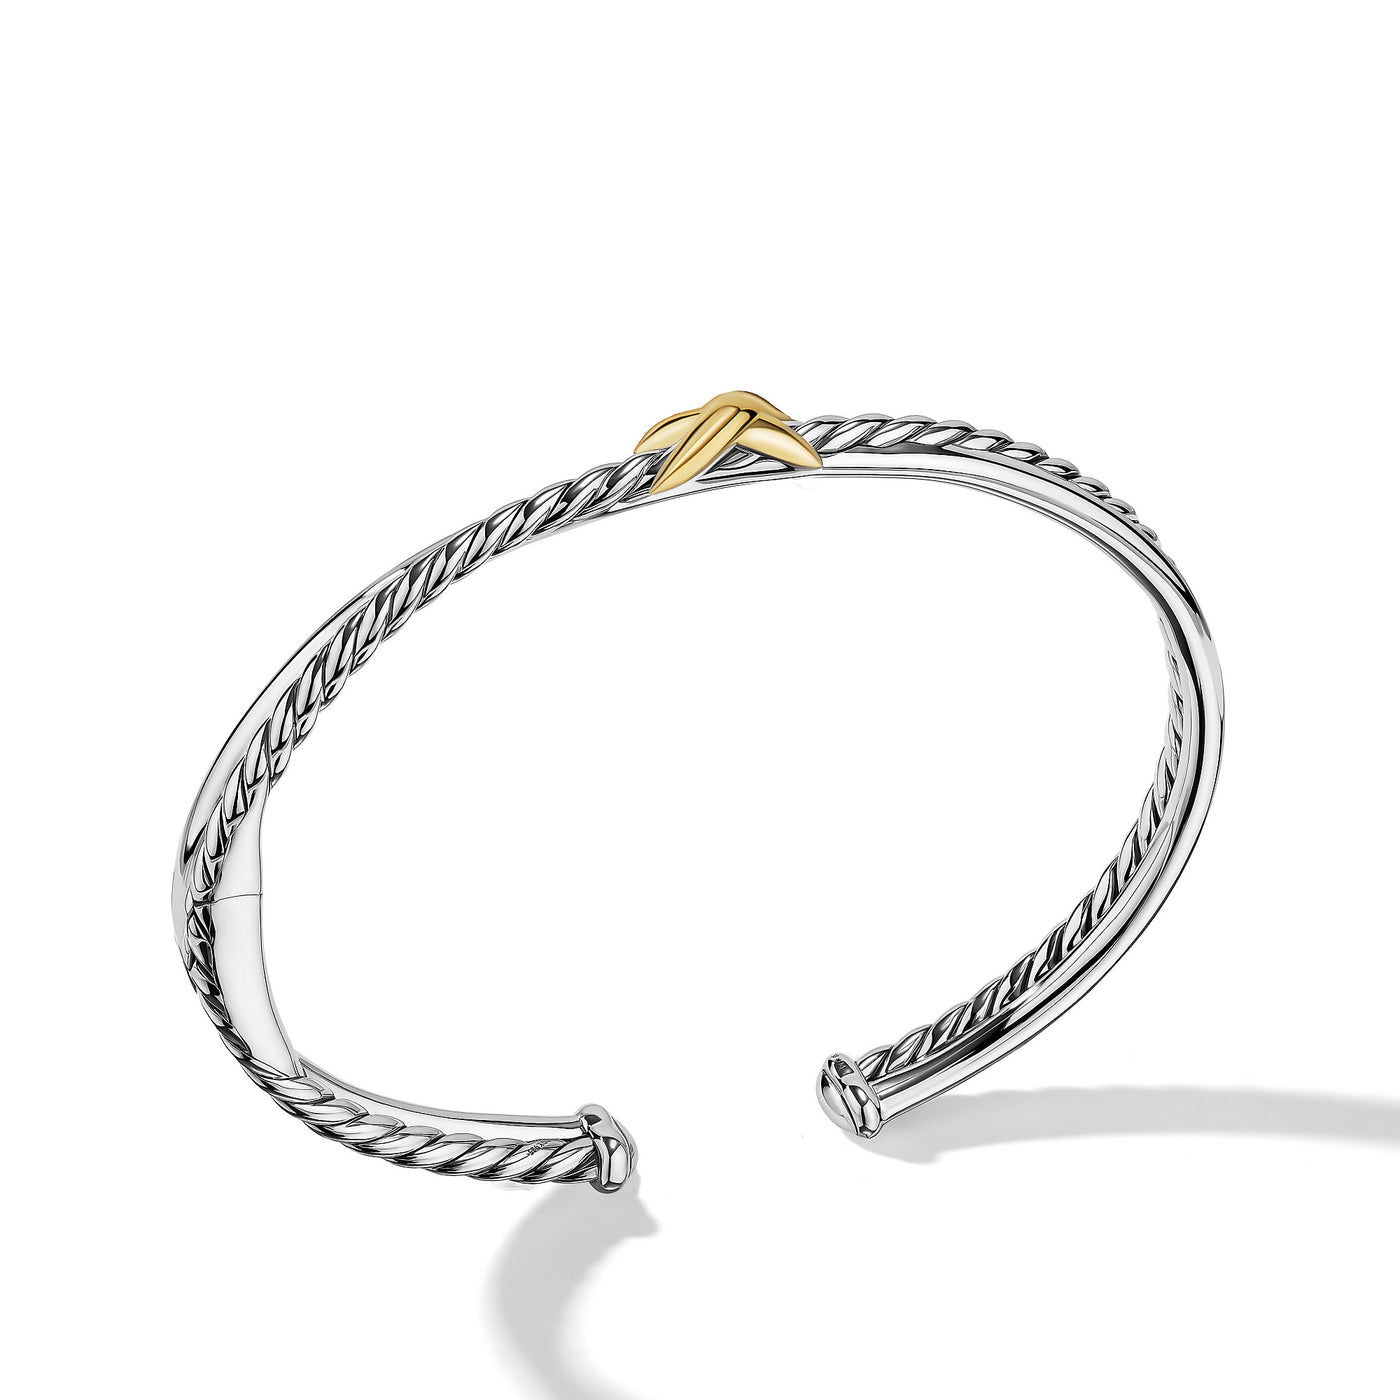 Petite X Center Station Bracelet in Sterling Silver with 18K Yellow Gold\, 5.2mm